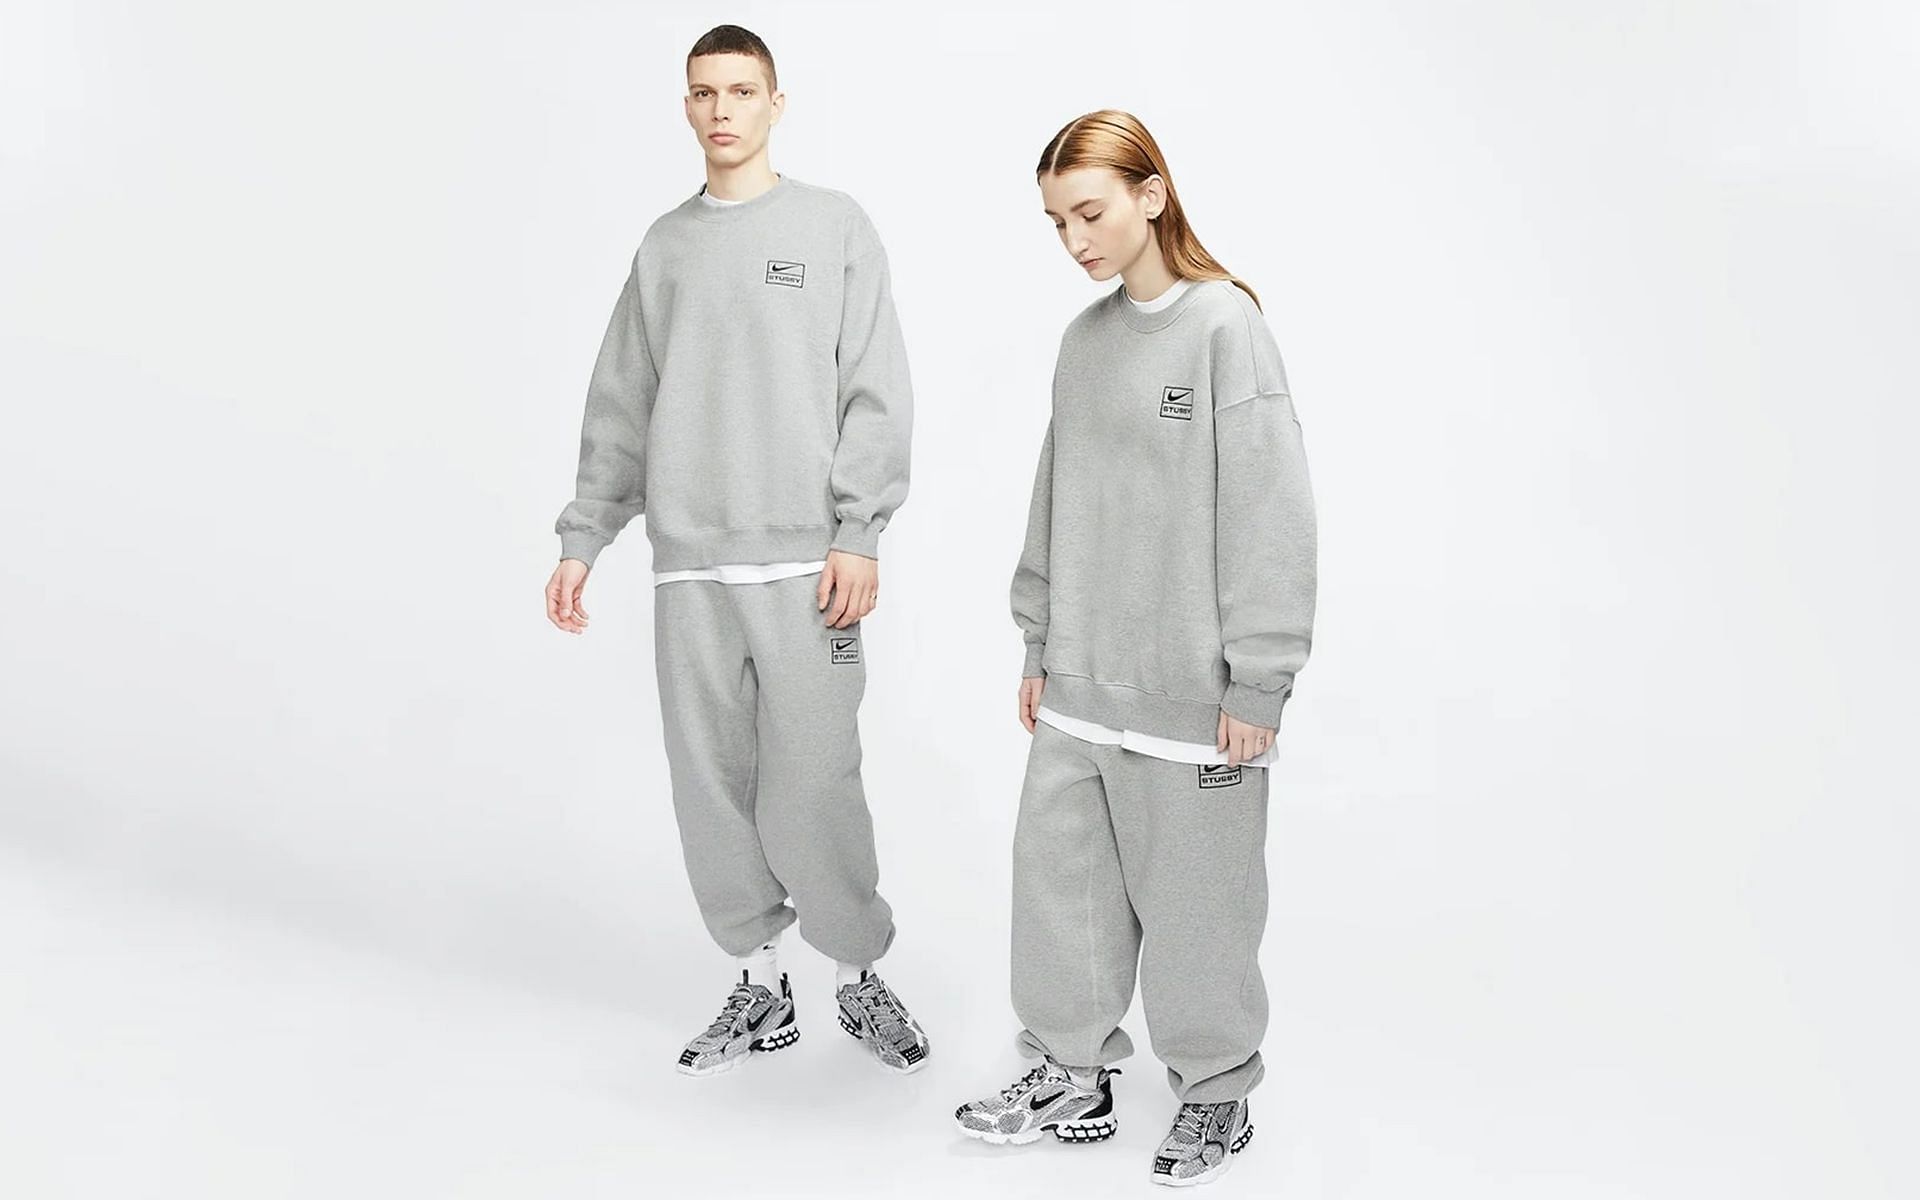 Stüssy x Nike apparel collection Where to buy, release date, and more